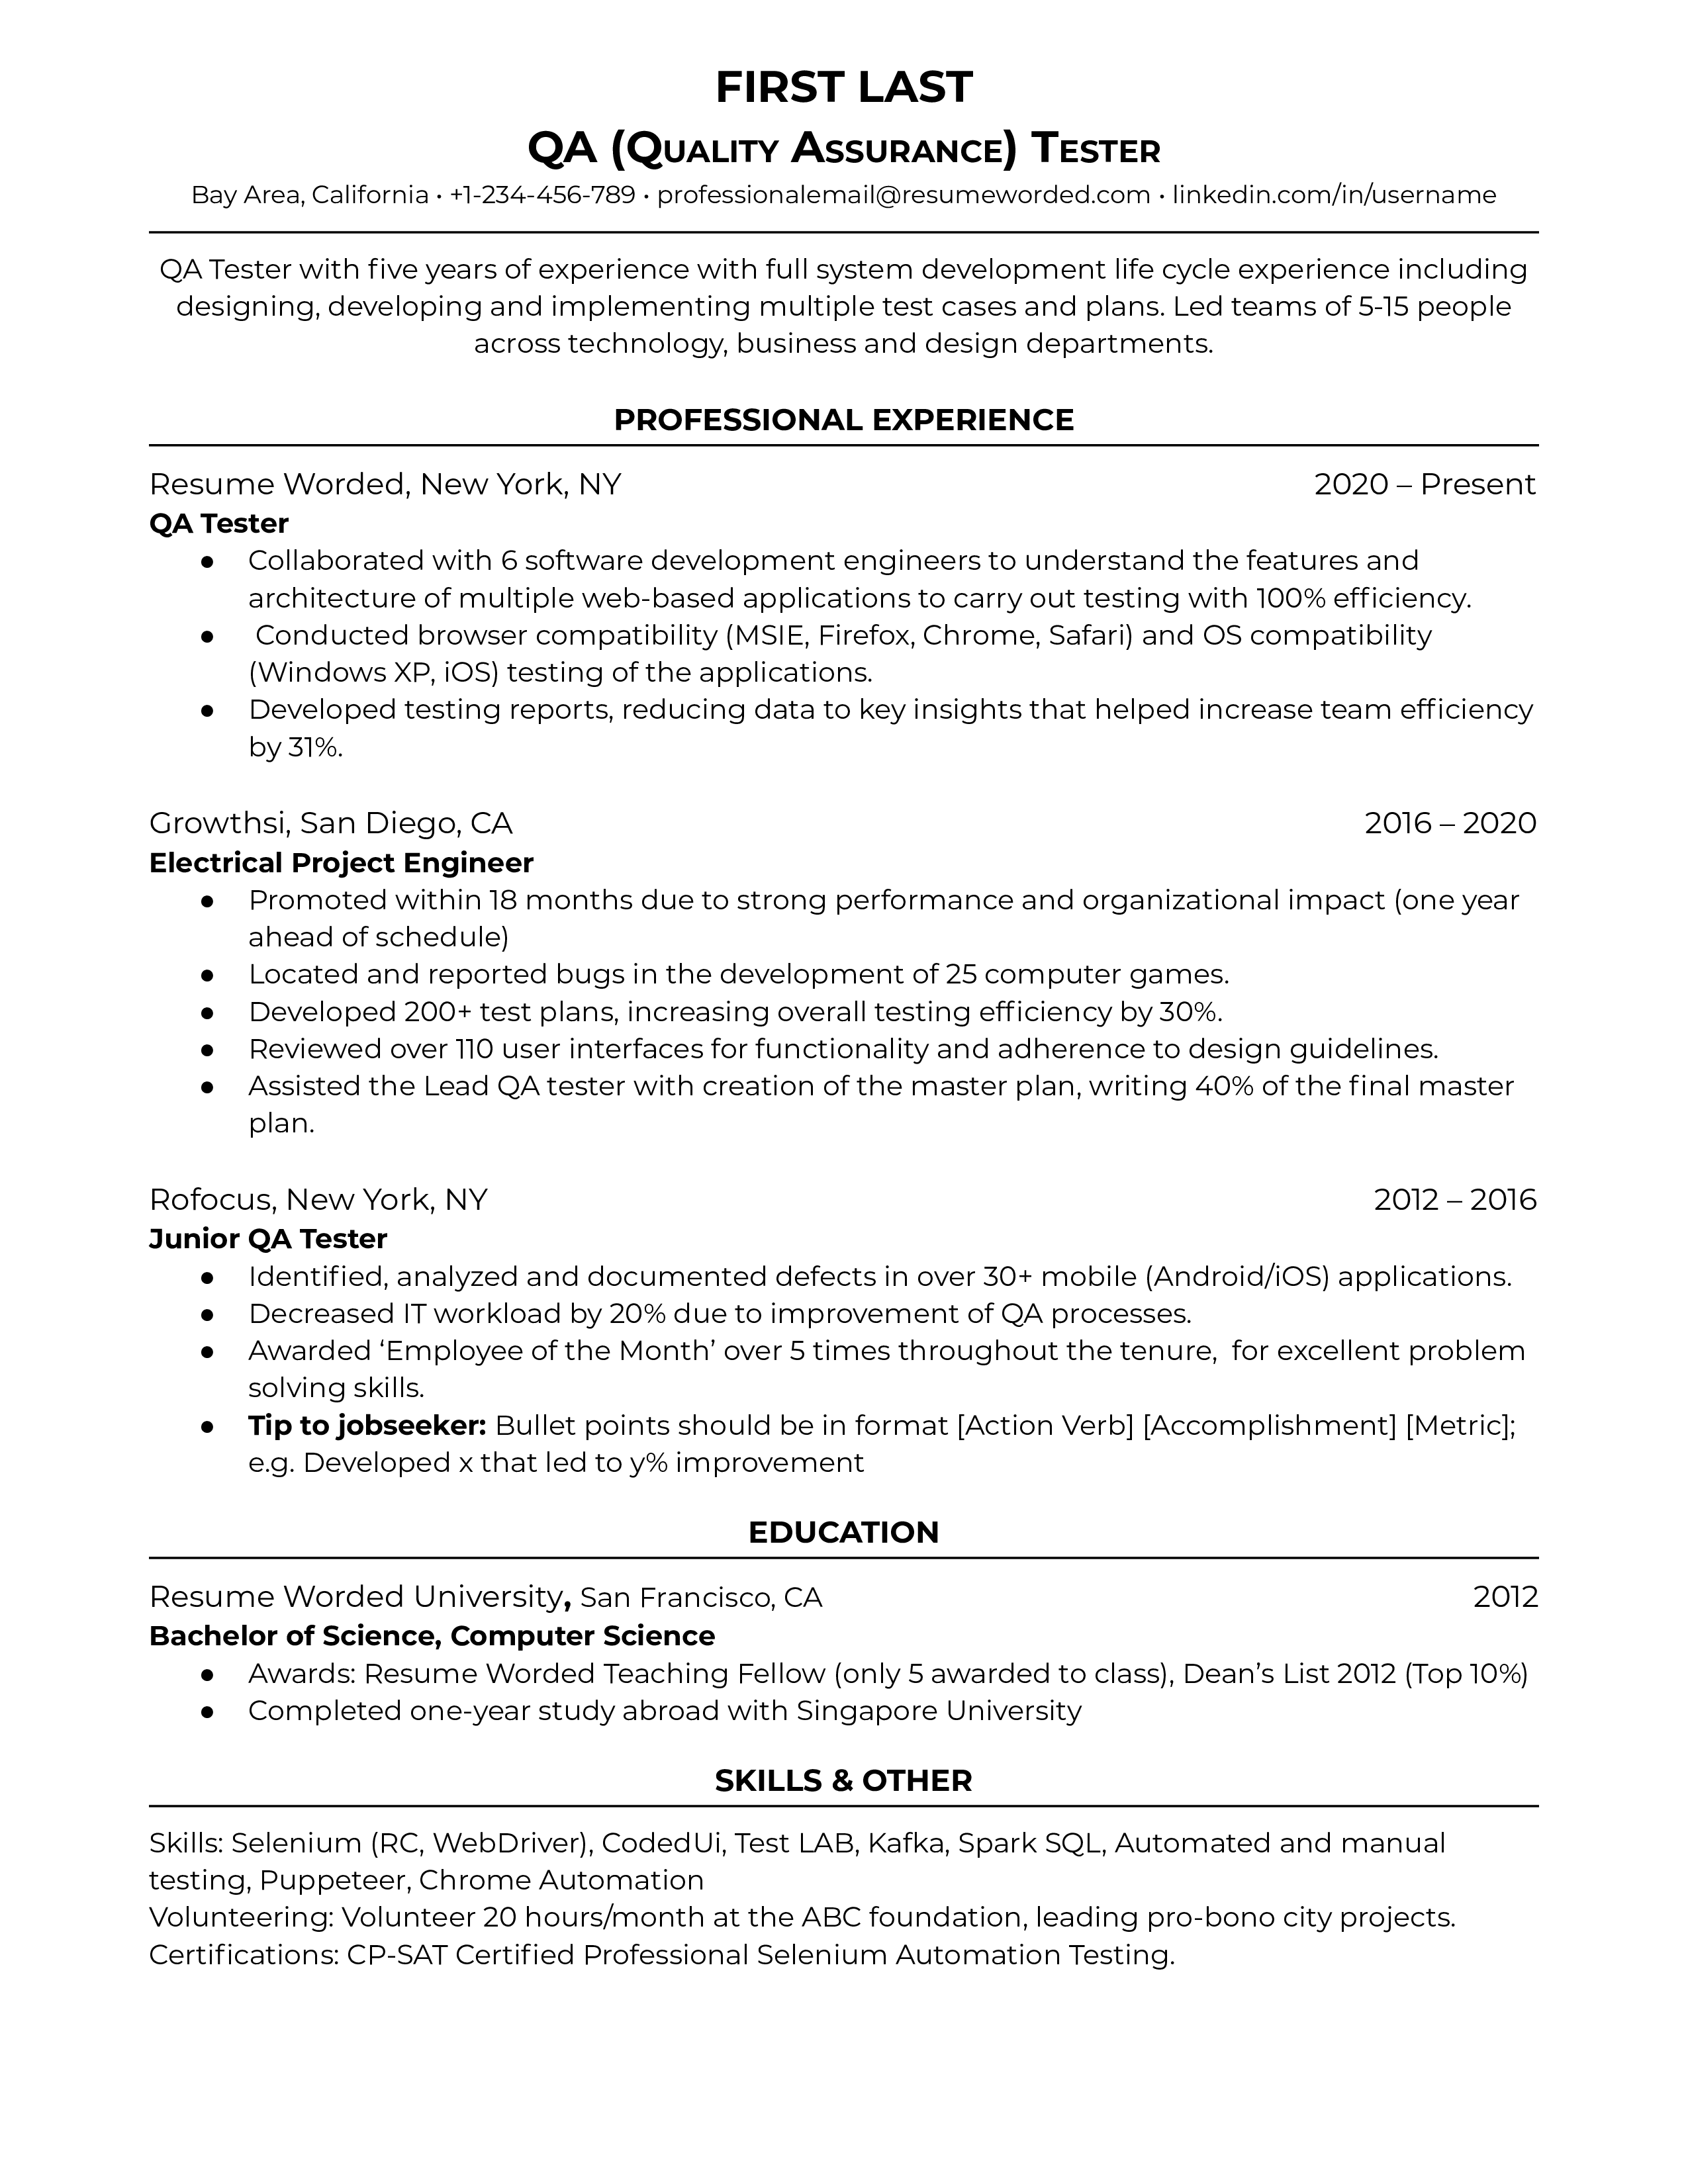 A Quality Assurance Tester resume highlighting experience in executing manual test cases, identifying software defects, and ensuring the quality of a product.